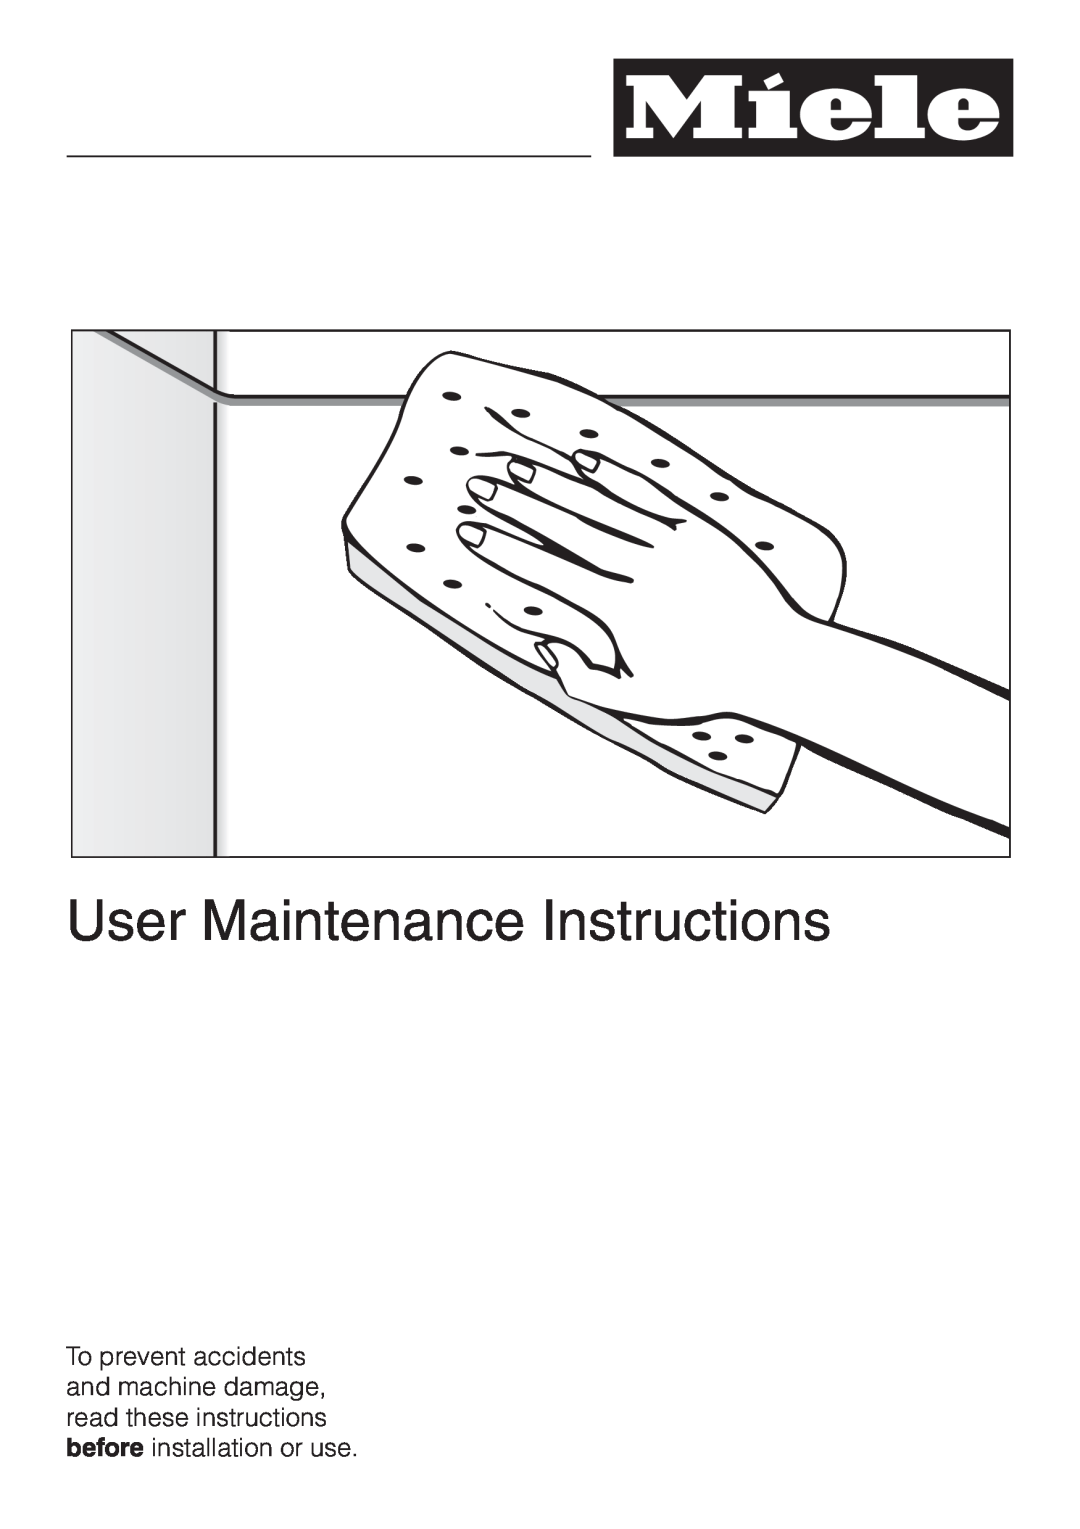 Miele G 2150, G 1150 operating instructions User Maintenance Instructions 